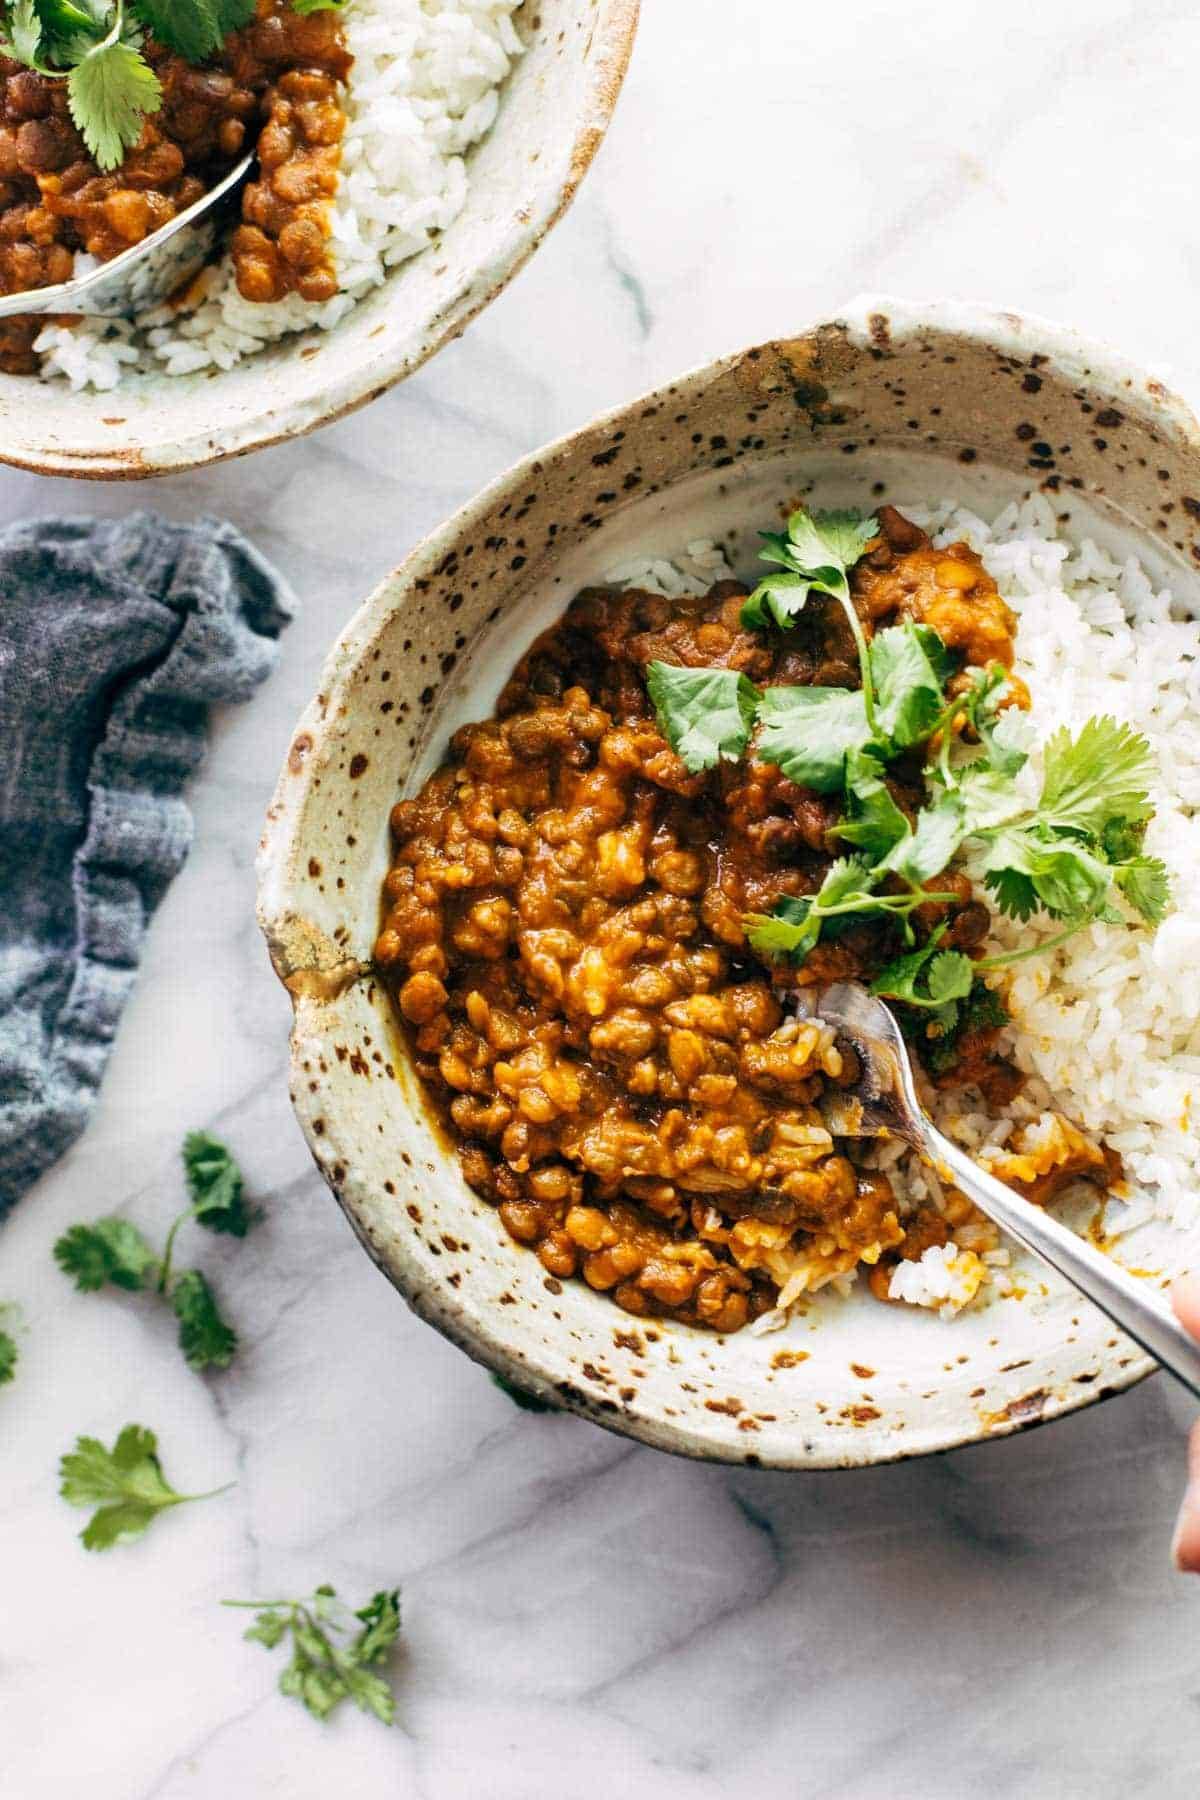 Red curry lentils in a bowl with rice.